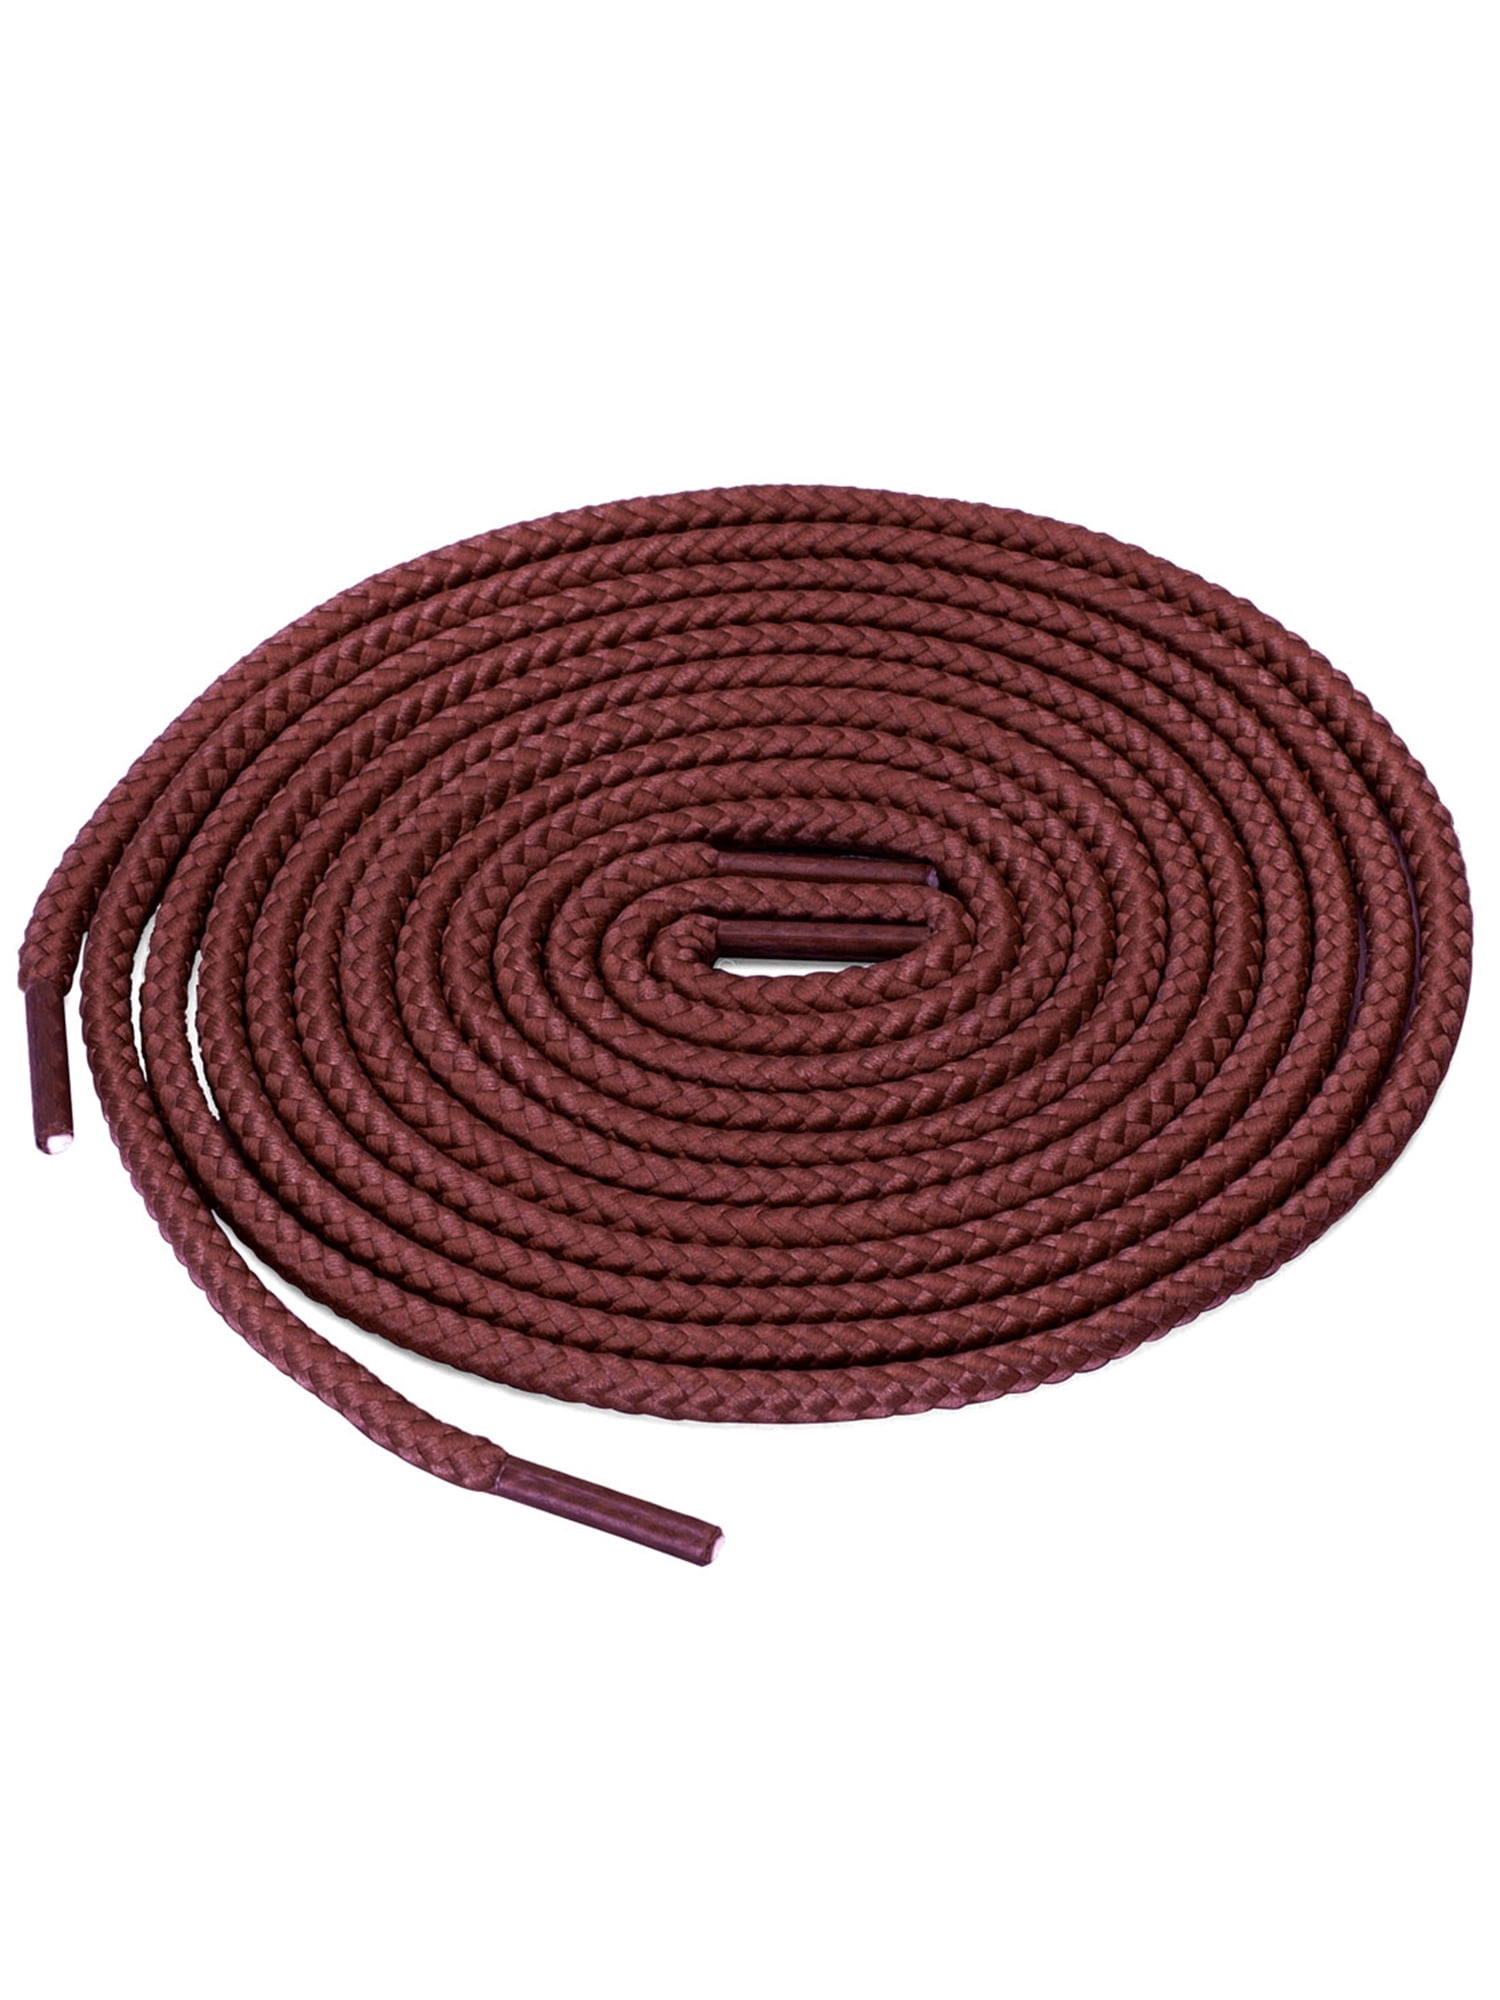 SHOELACES round laces RED for WORK OUTDOOR SAFETY boots 75-200cm 5mm SNORS 